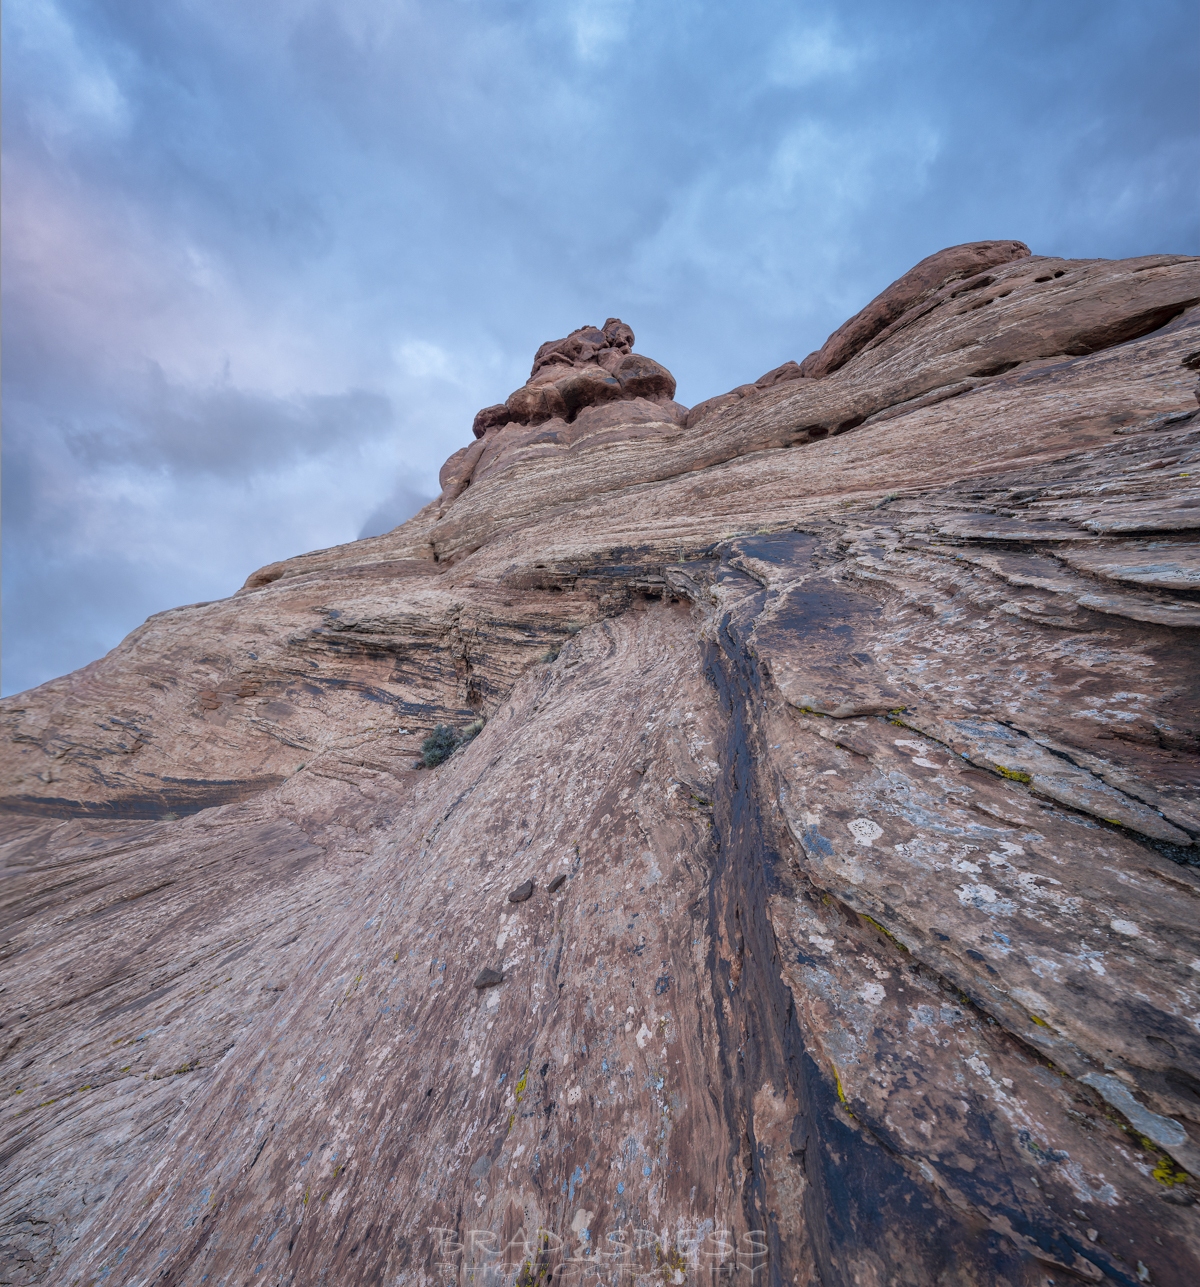 A vertical pano of this cool rock with lots lots of leading lines, sky blended in later to add some 